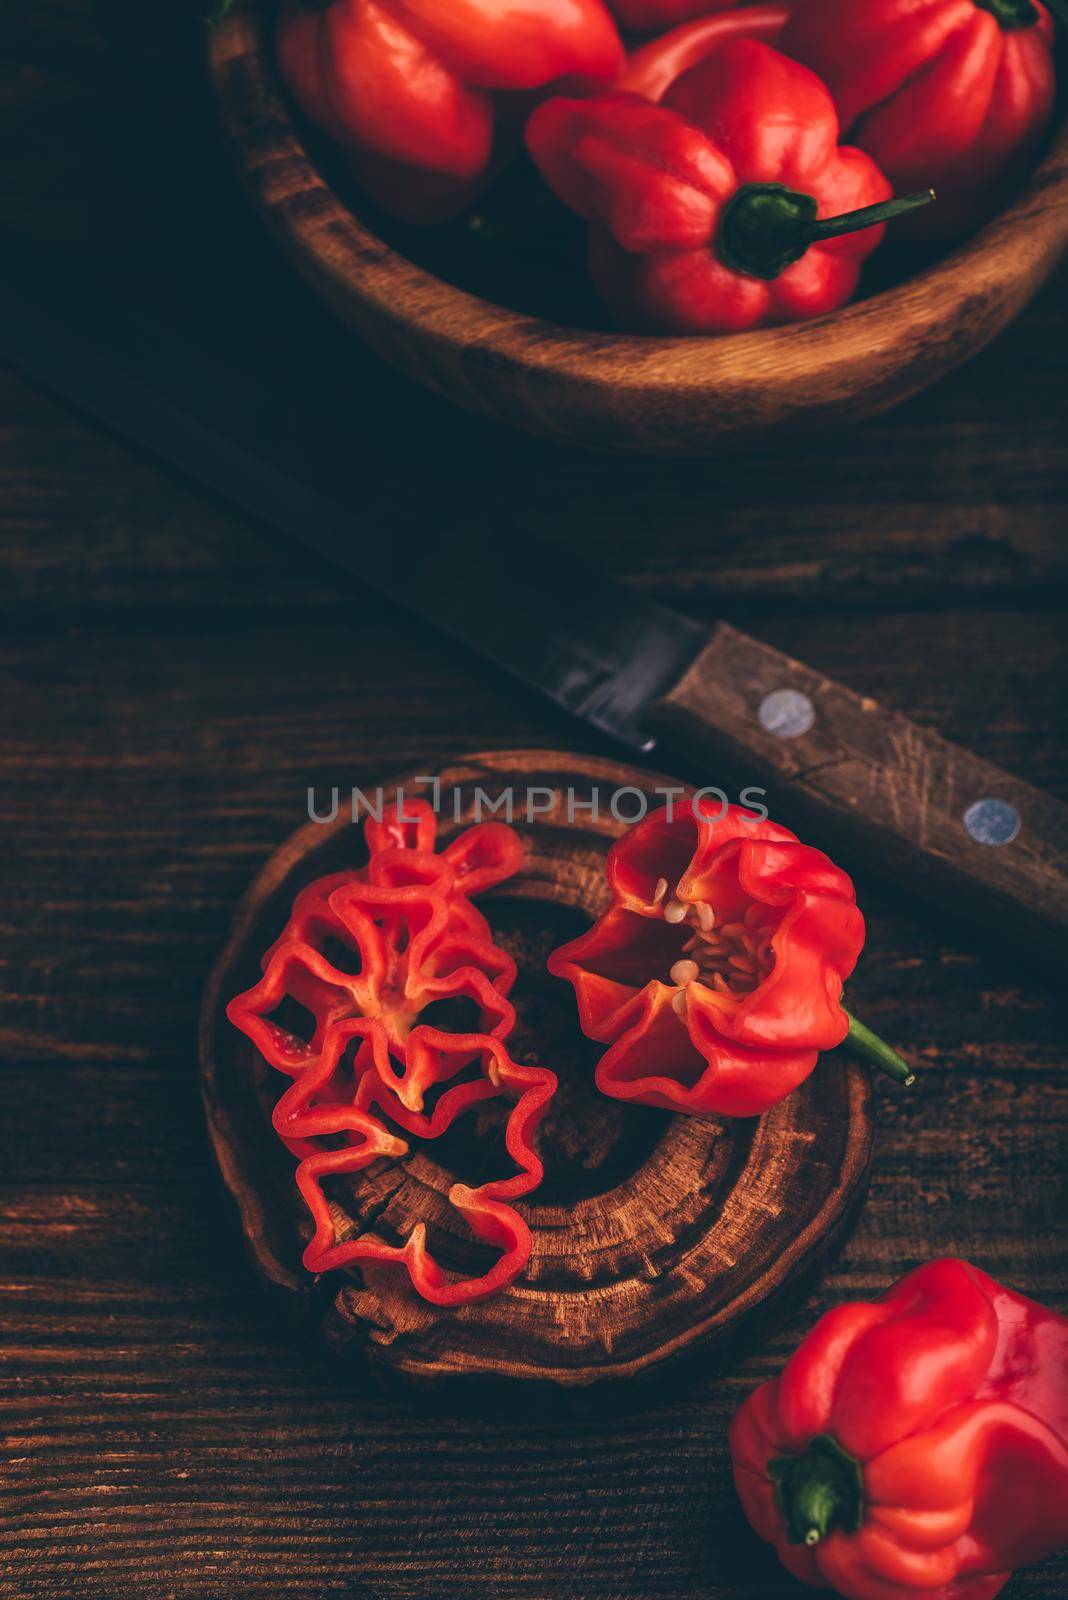 Red Habanero Chili Peppers and One Sliced on a Dark Wooden Surface